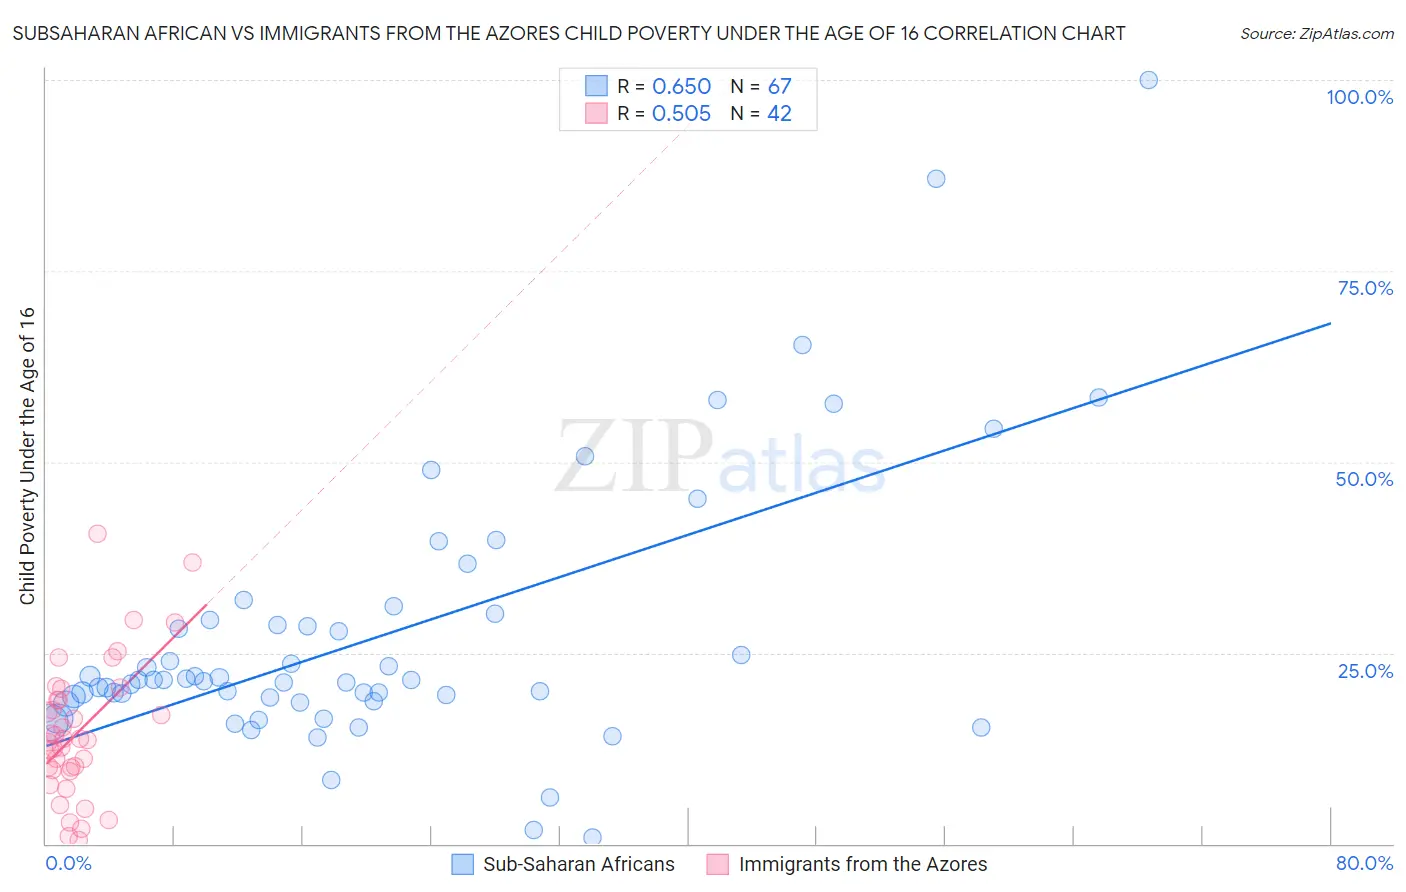 Subsaharan African vs Immigrants from the Azores Child Poverty Under the Age of 16